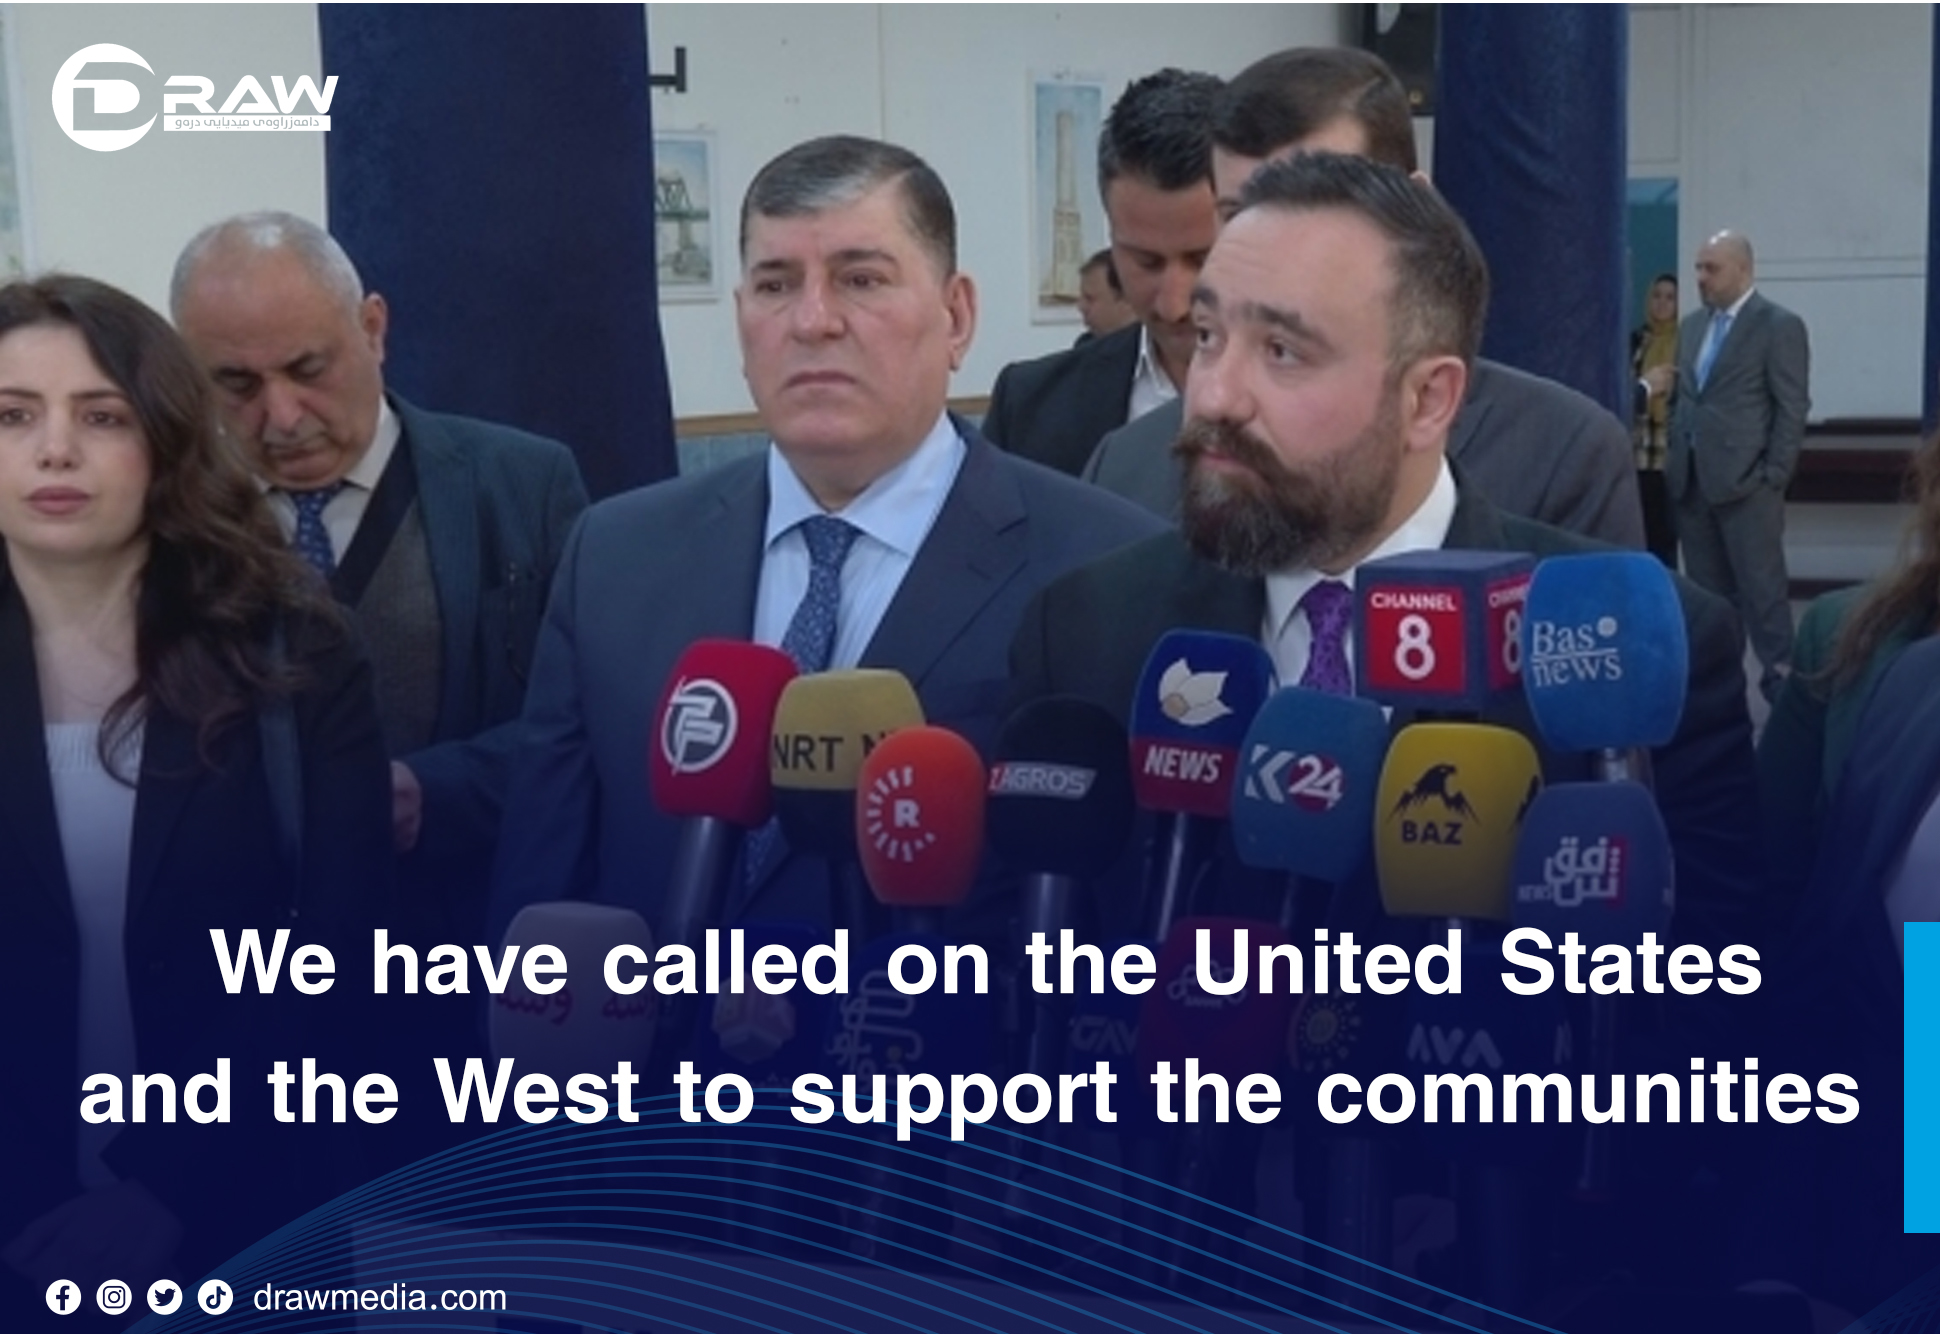 DrawMedia.net / "We have called on the United States and the West to support the communities"